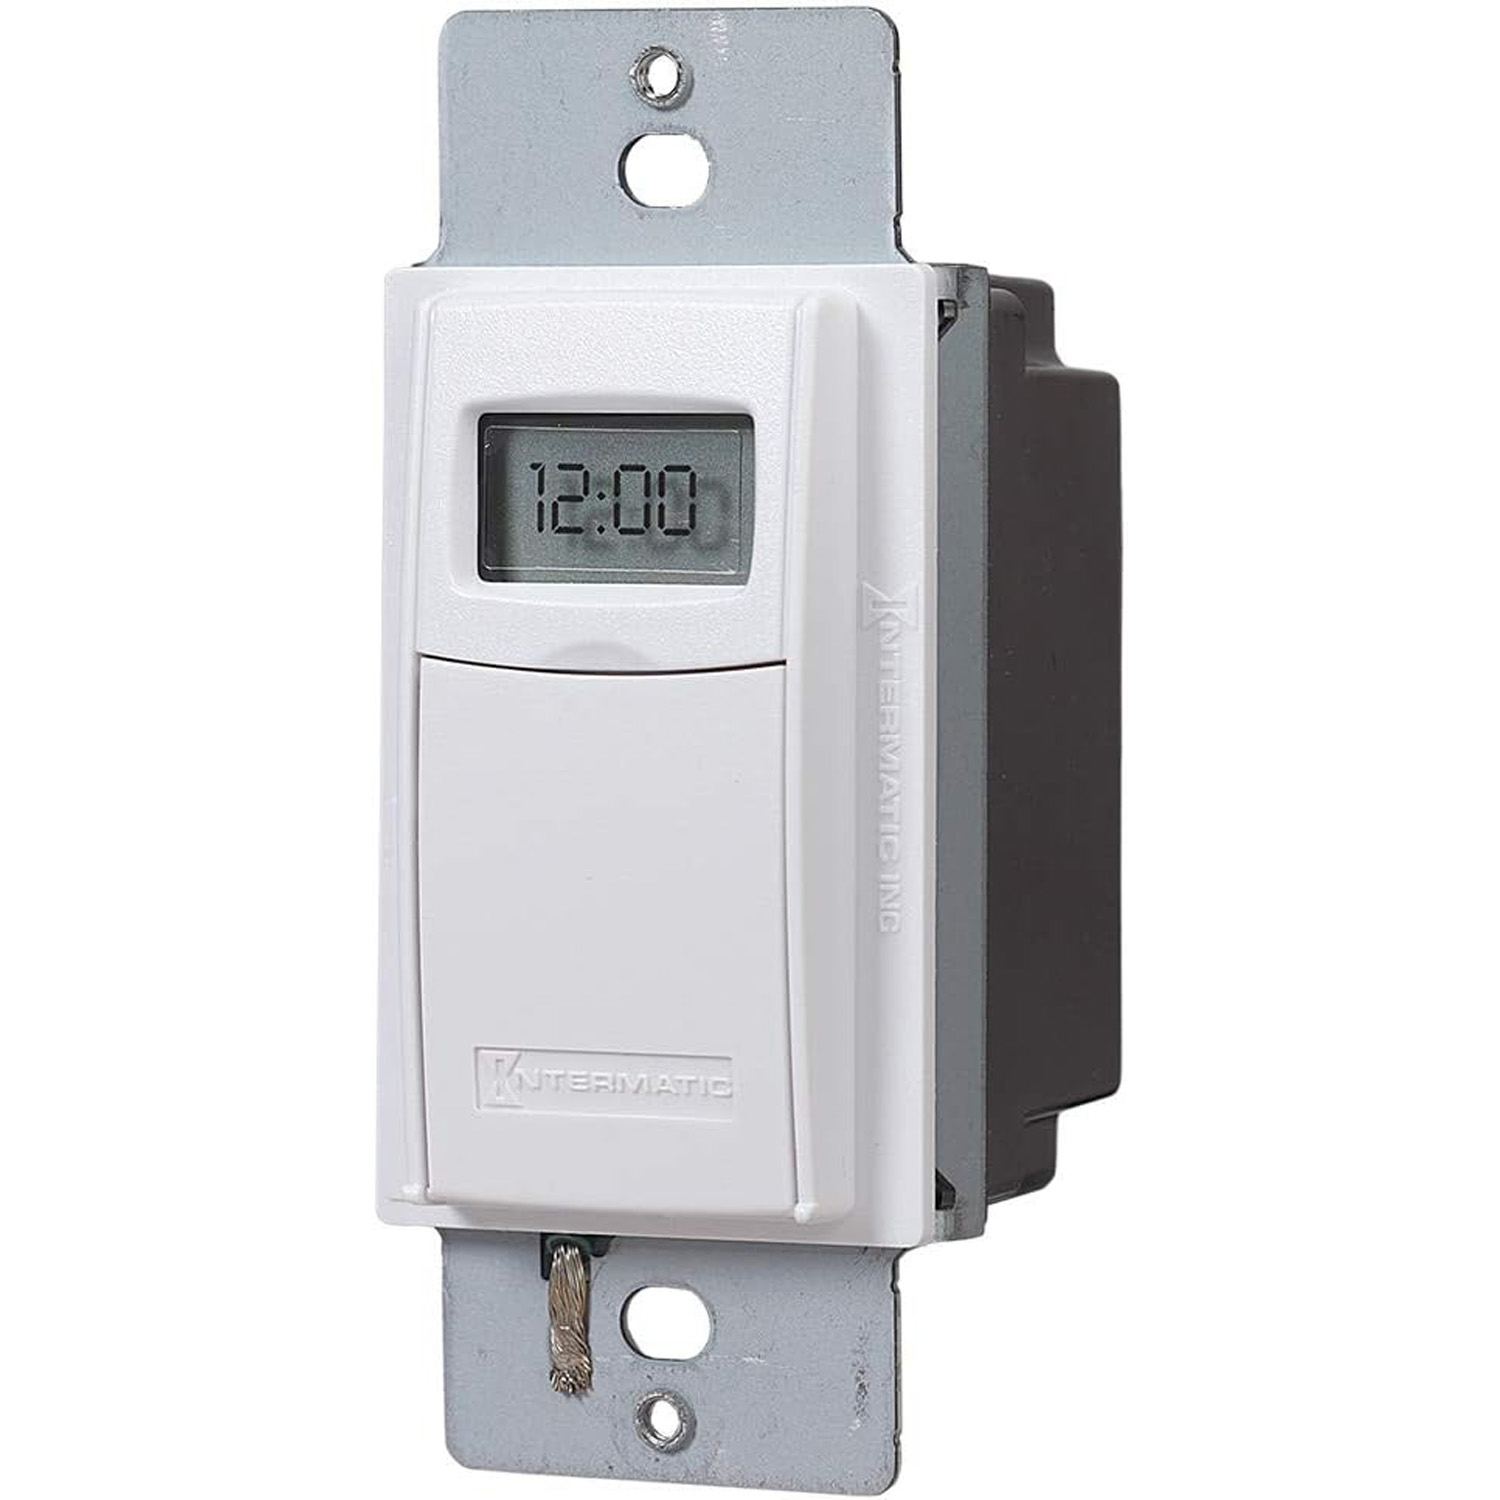 Intermatic EI400WC Programmable Electronic Countdown In-Wall Timer, White